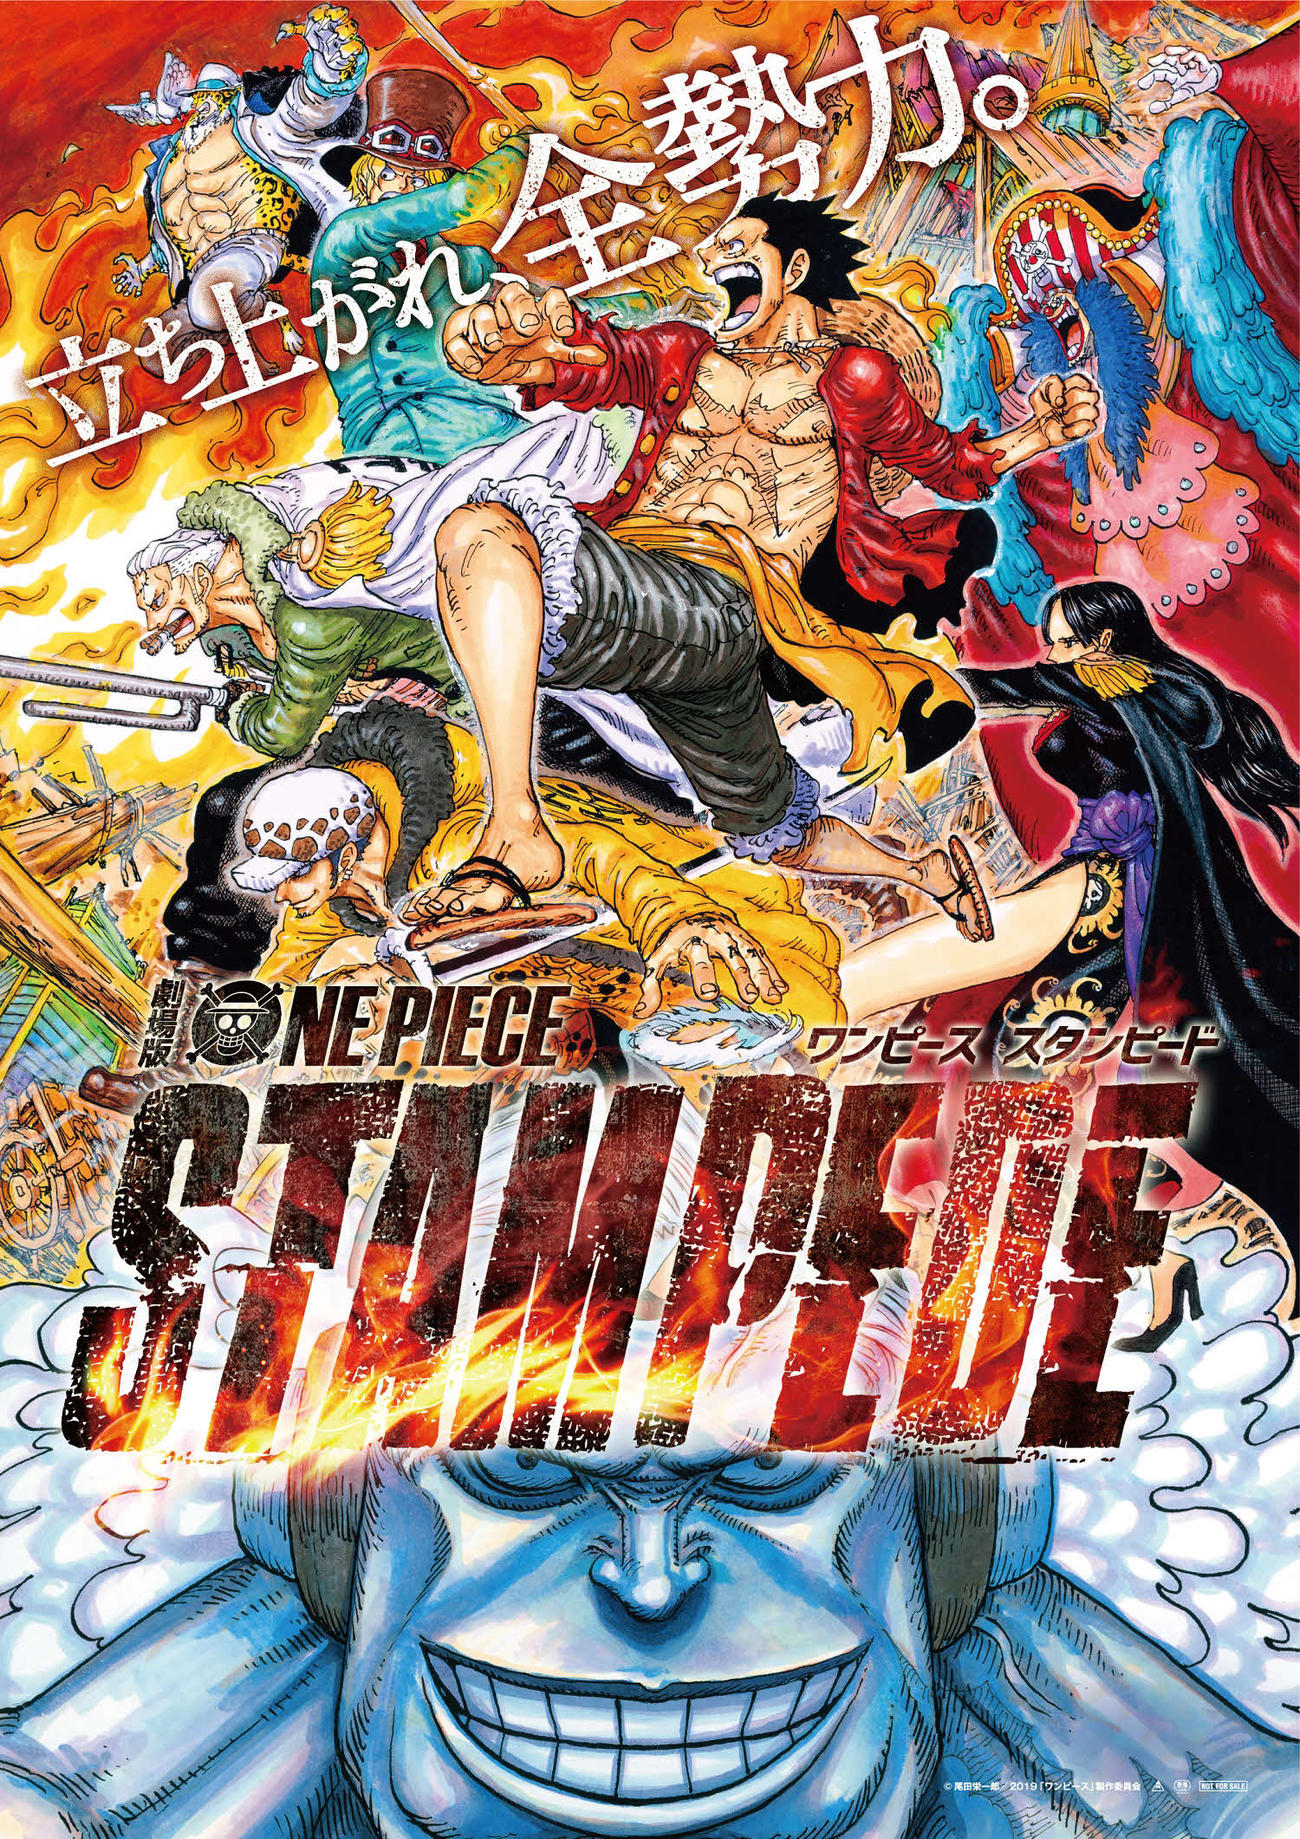 ONE PIECE STAMPEDEの登場人物・キャラクターまとめ【ワンピース】